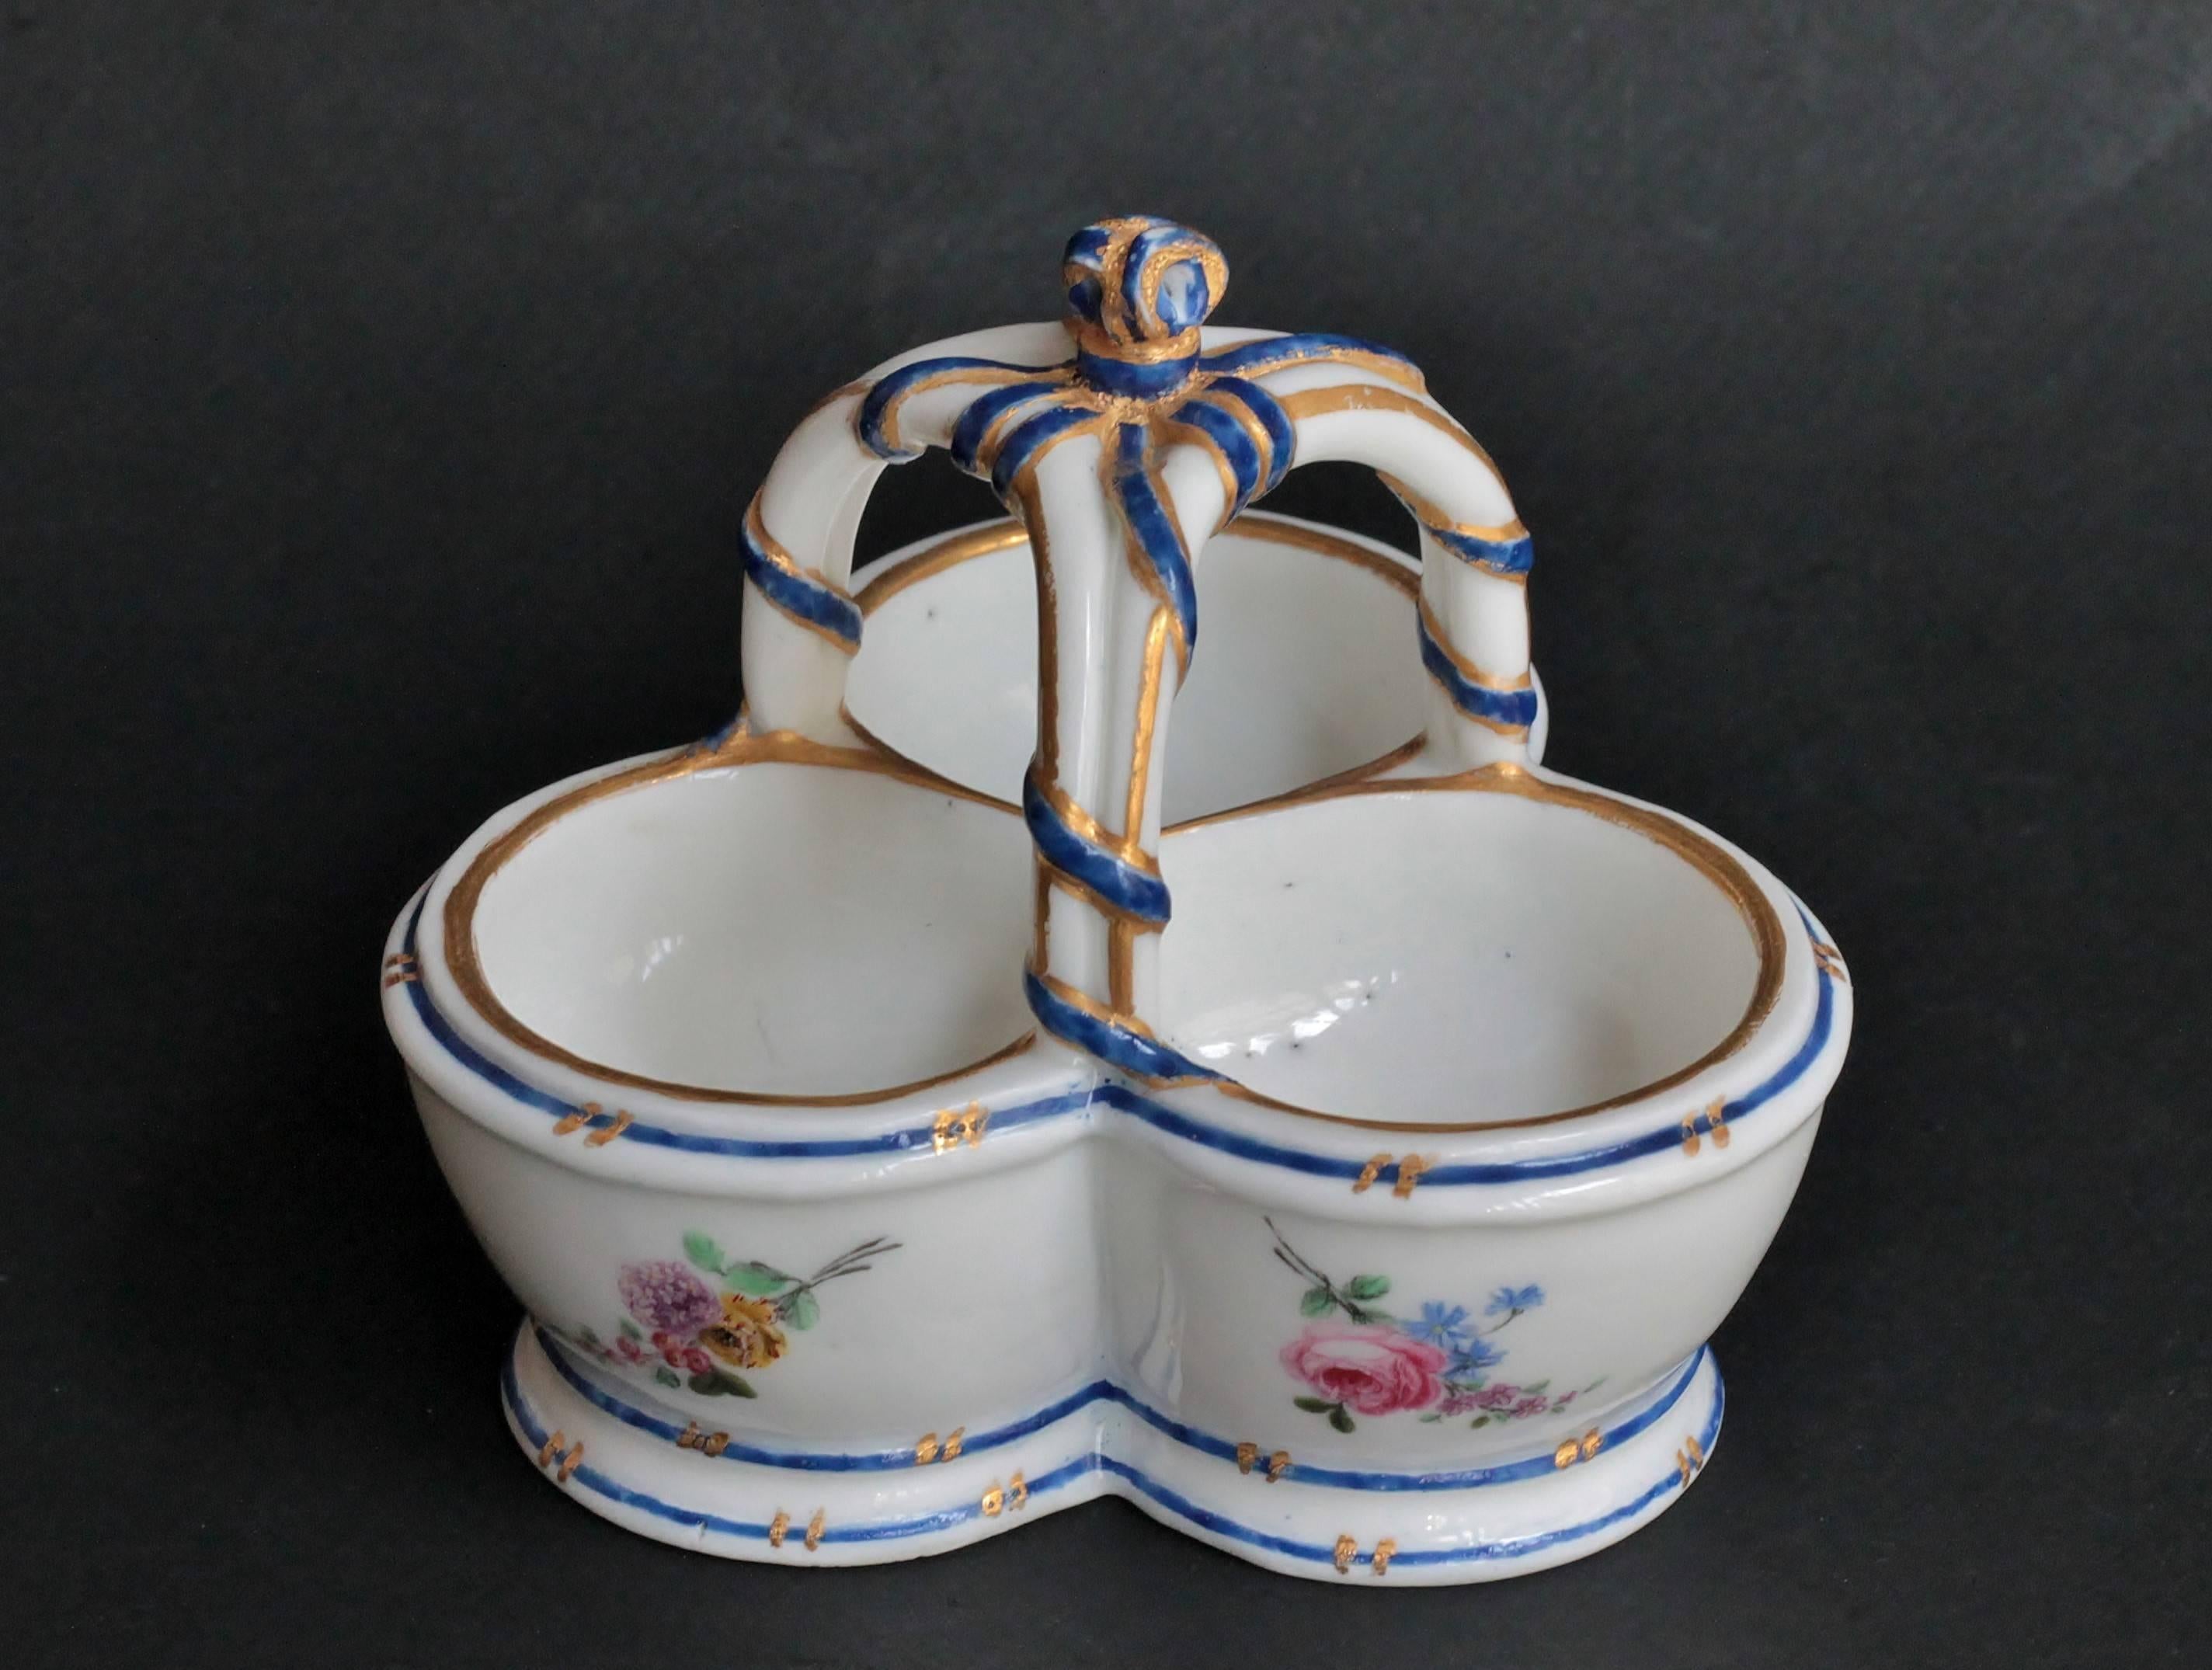 A Sèvres triple salt in porcelain painted with flower sprays and blue line borders with gilt dashes, the handle interlaced with a blue ribbon and edged with gilding. Small traces of LL monogram in purple.
Measures: Height 8.7 cm, width 10.5 cm,